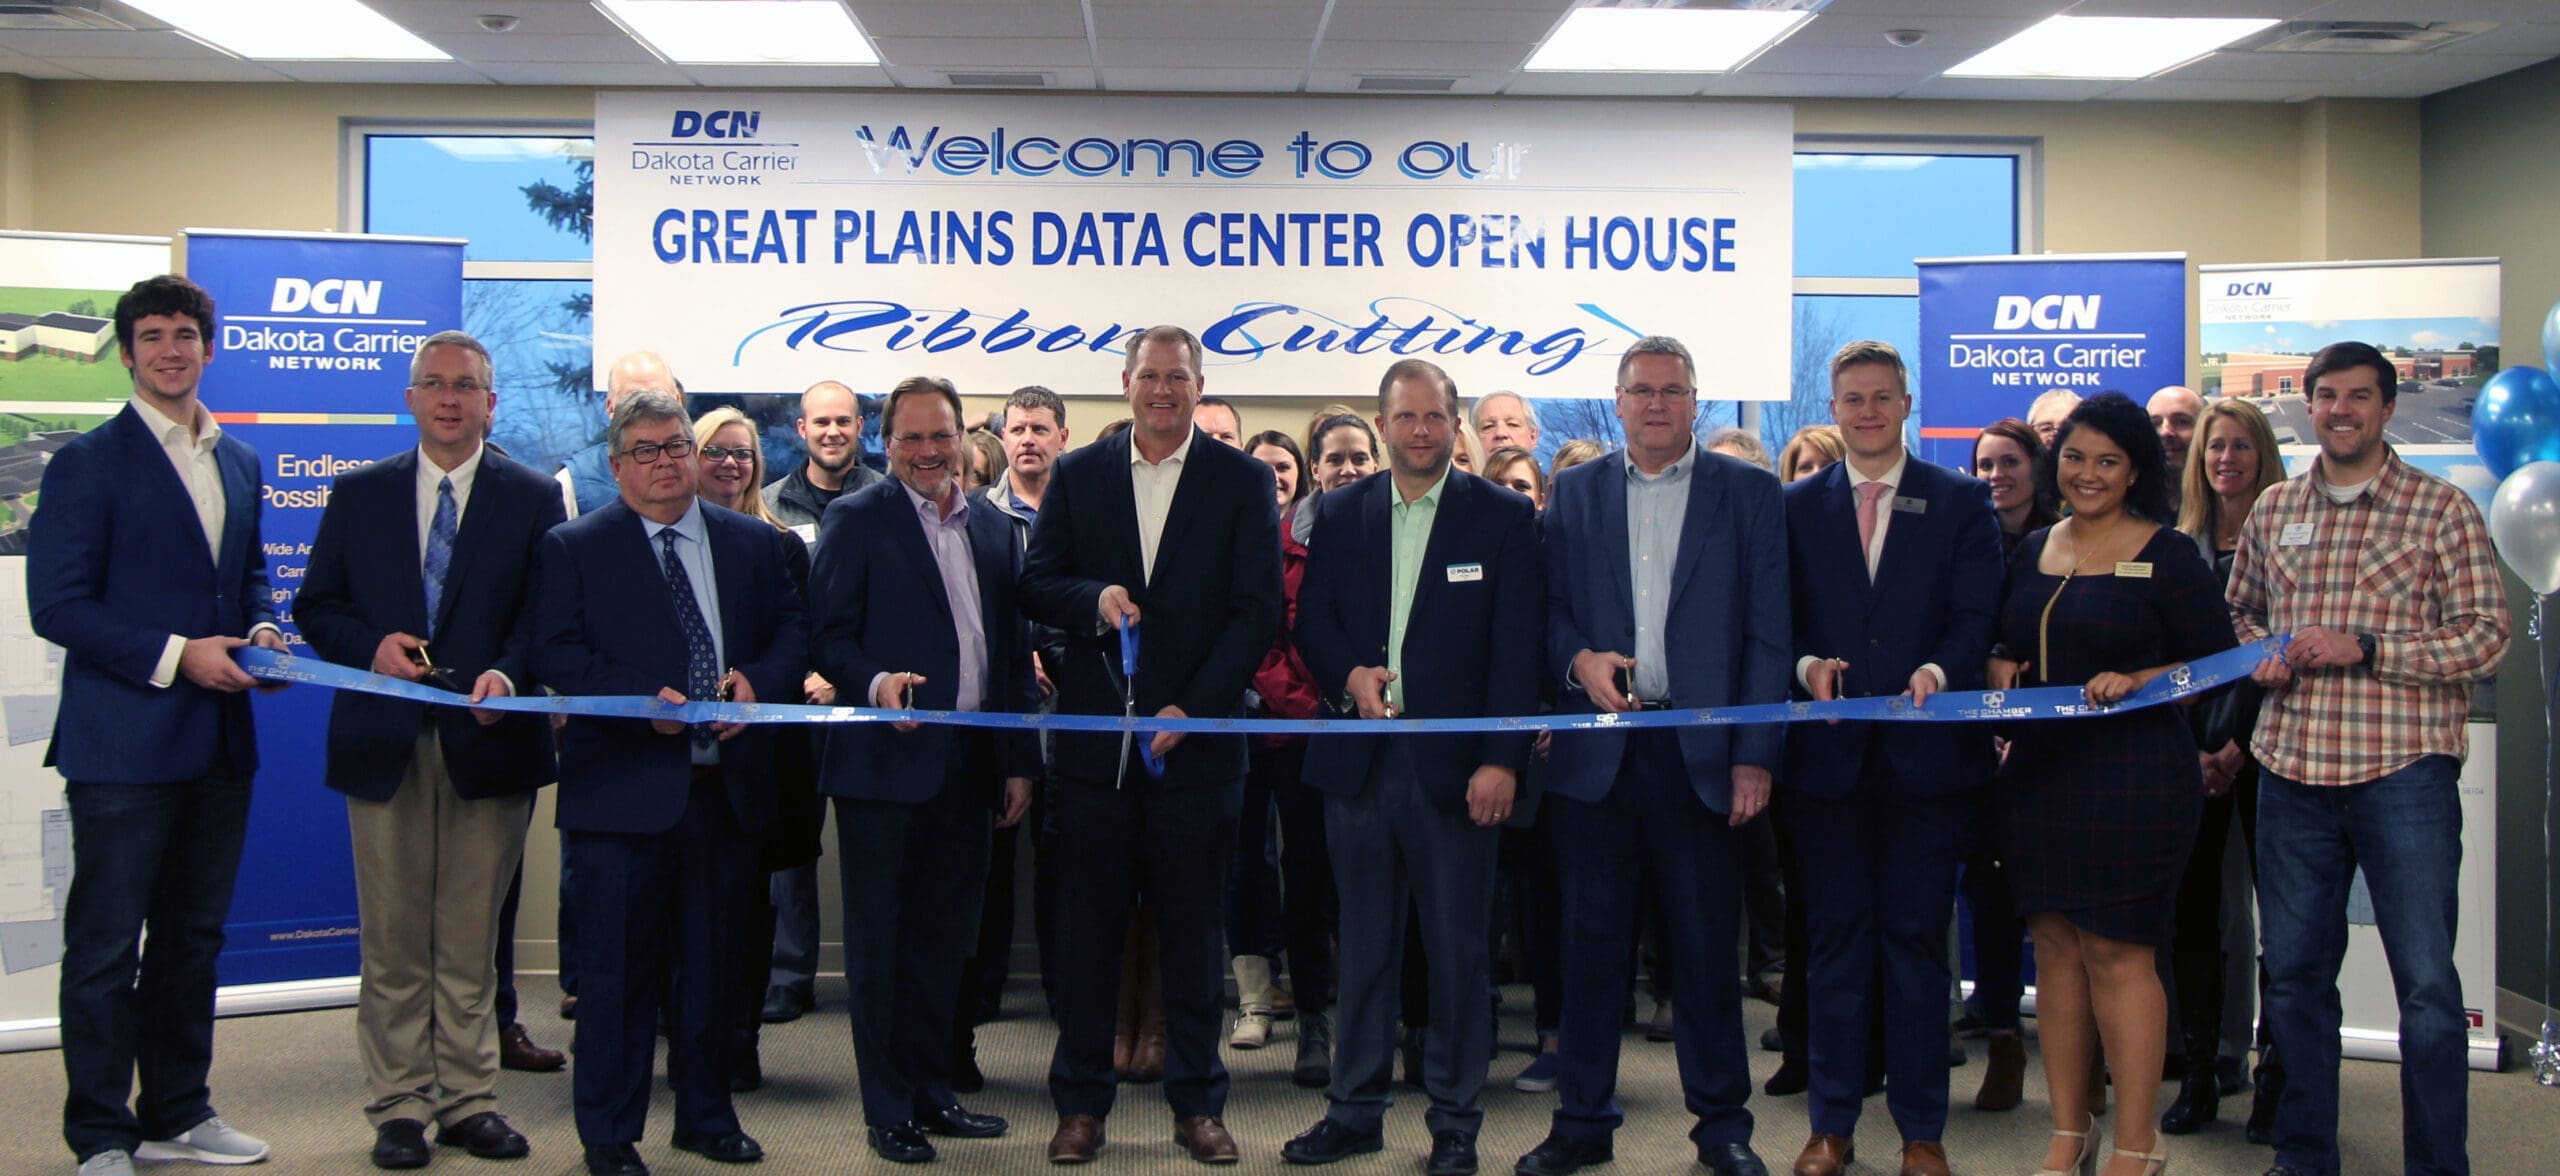 DCN completes Tier III Great Plains Data Center expansion